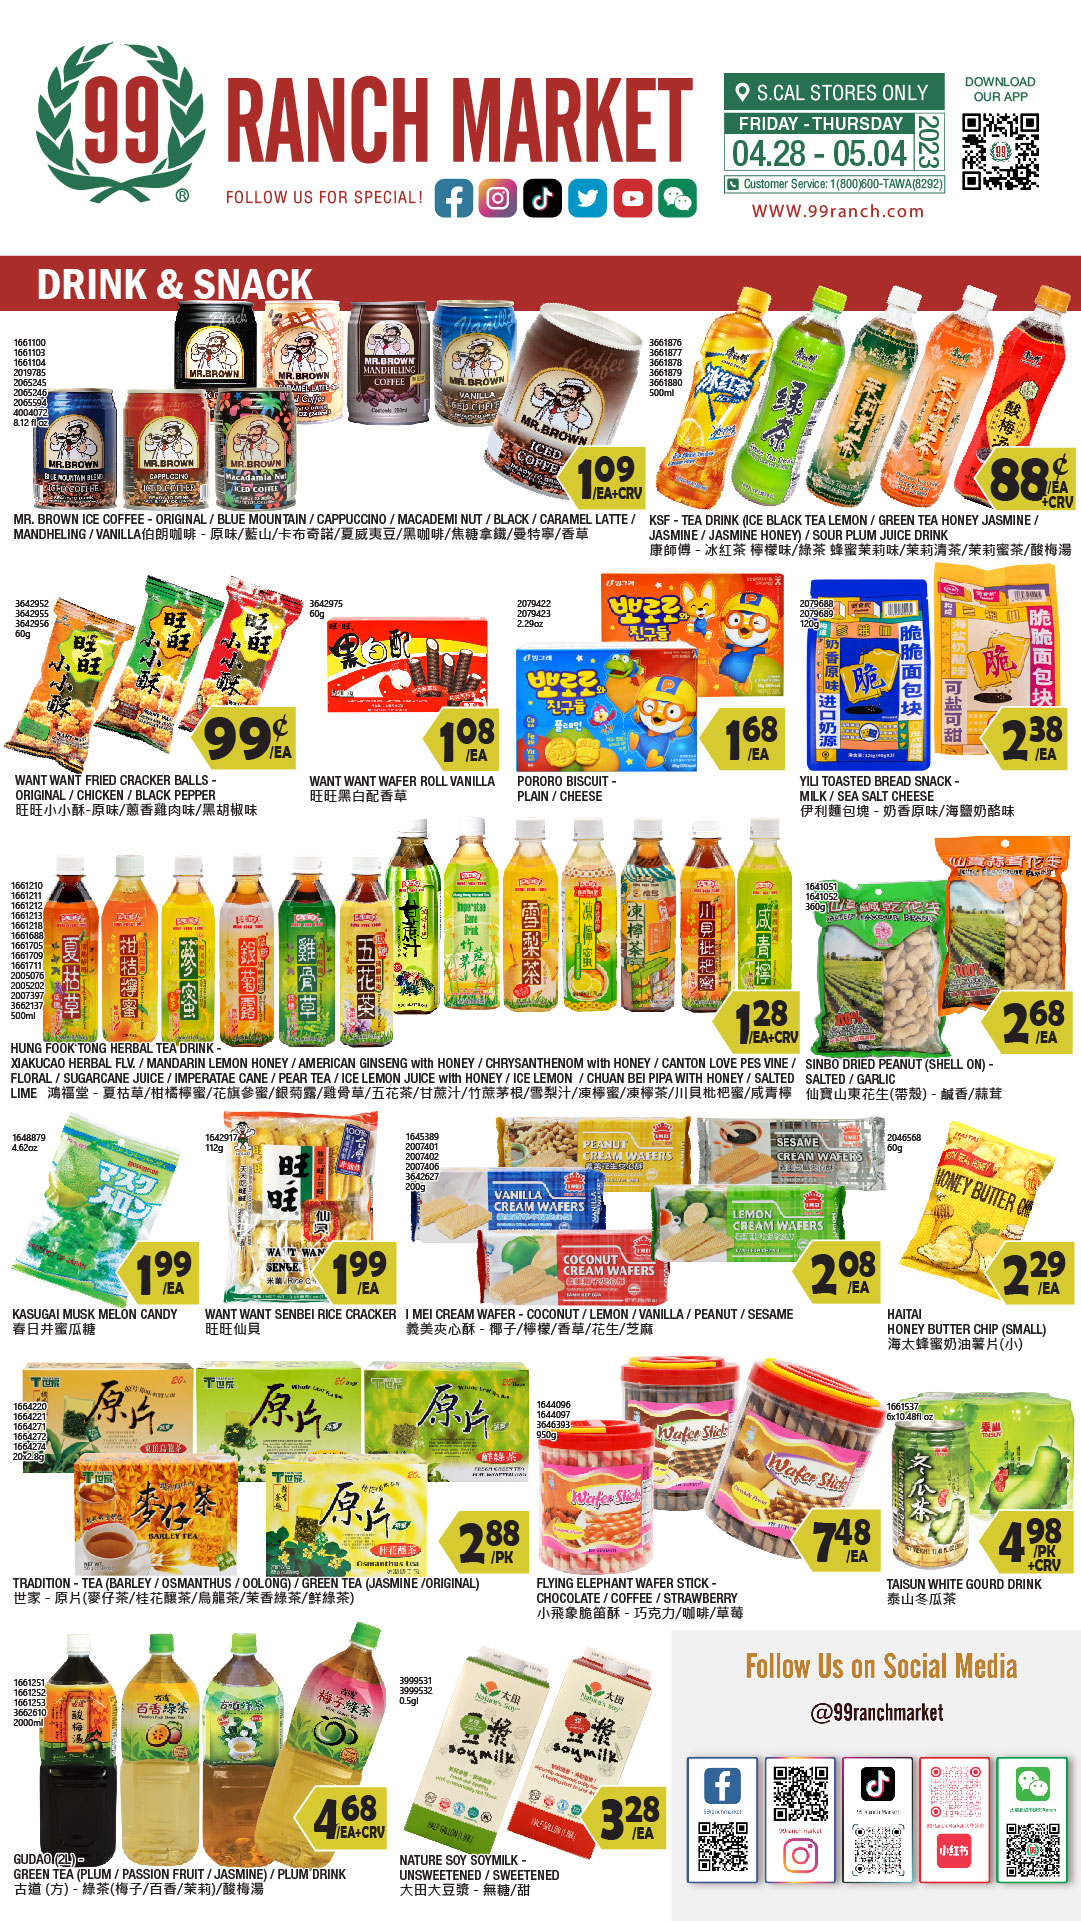 99 ranch market weekly ads